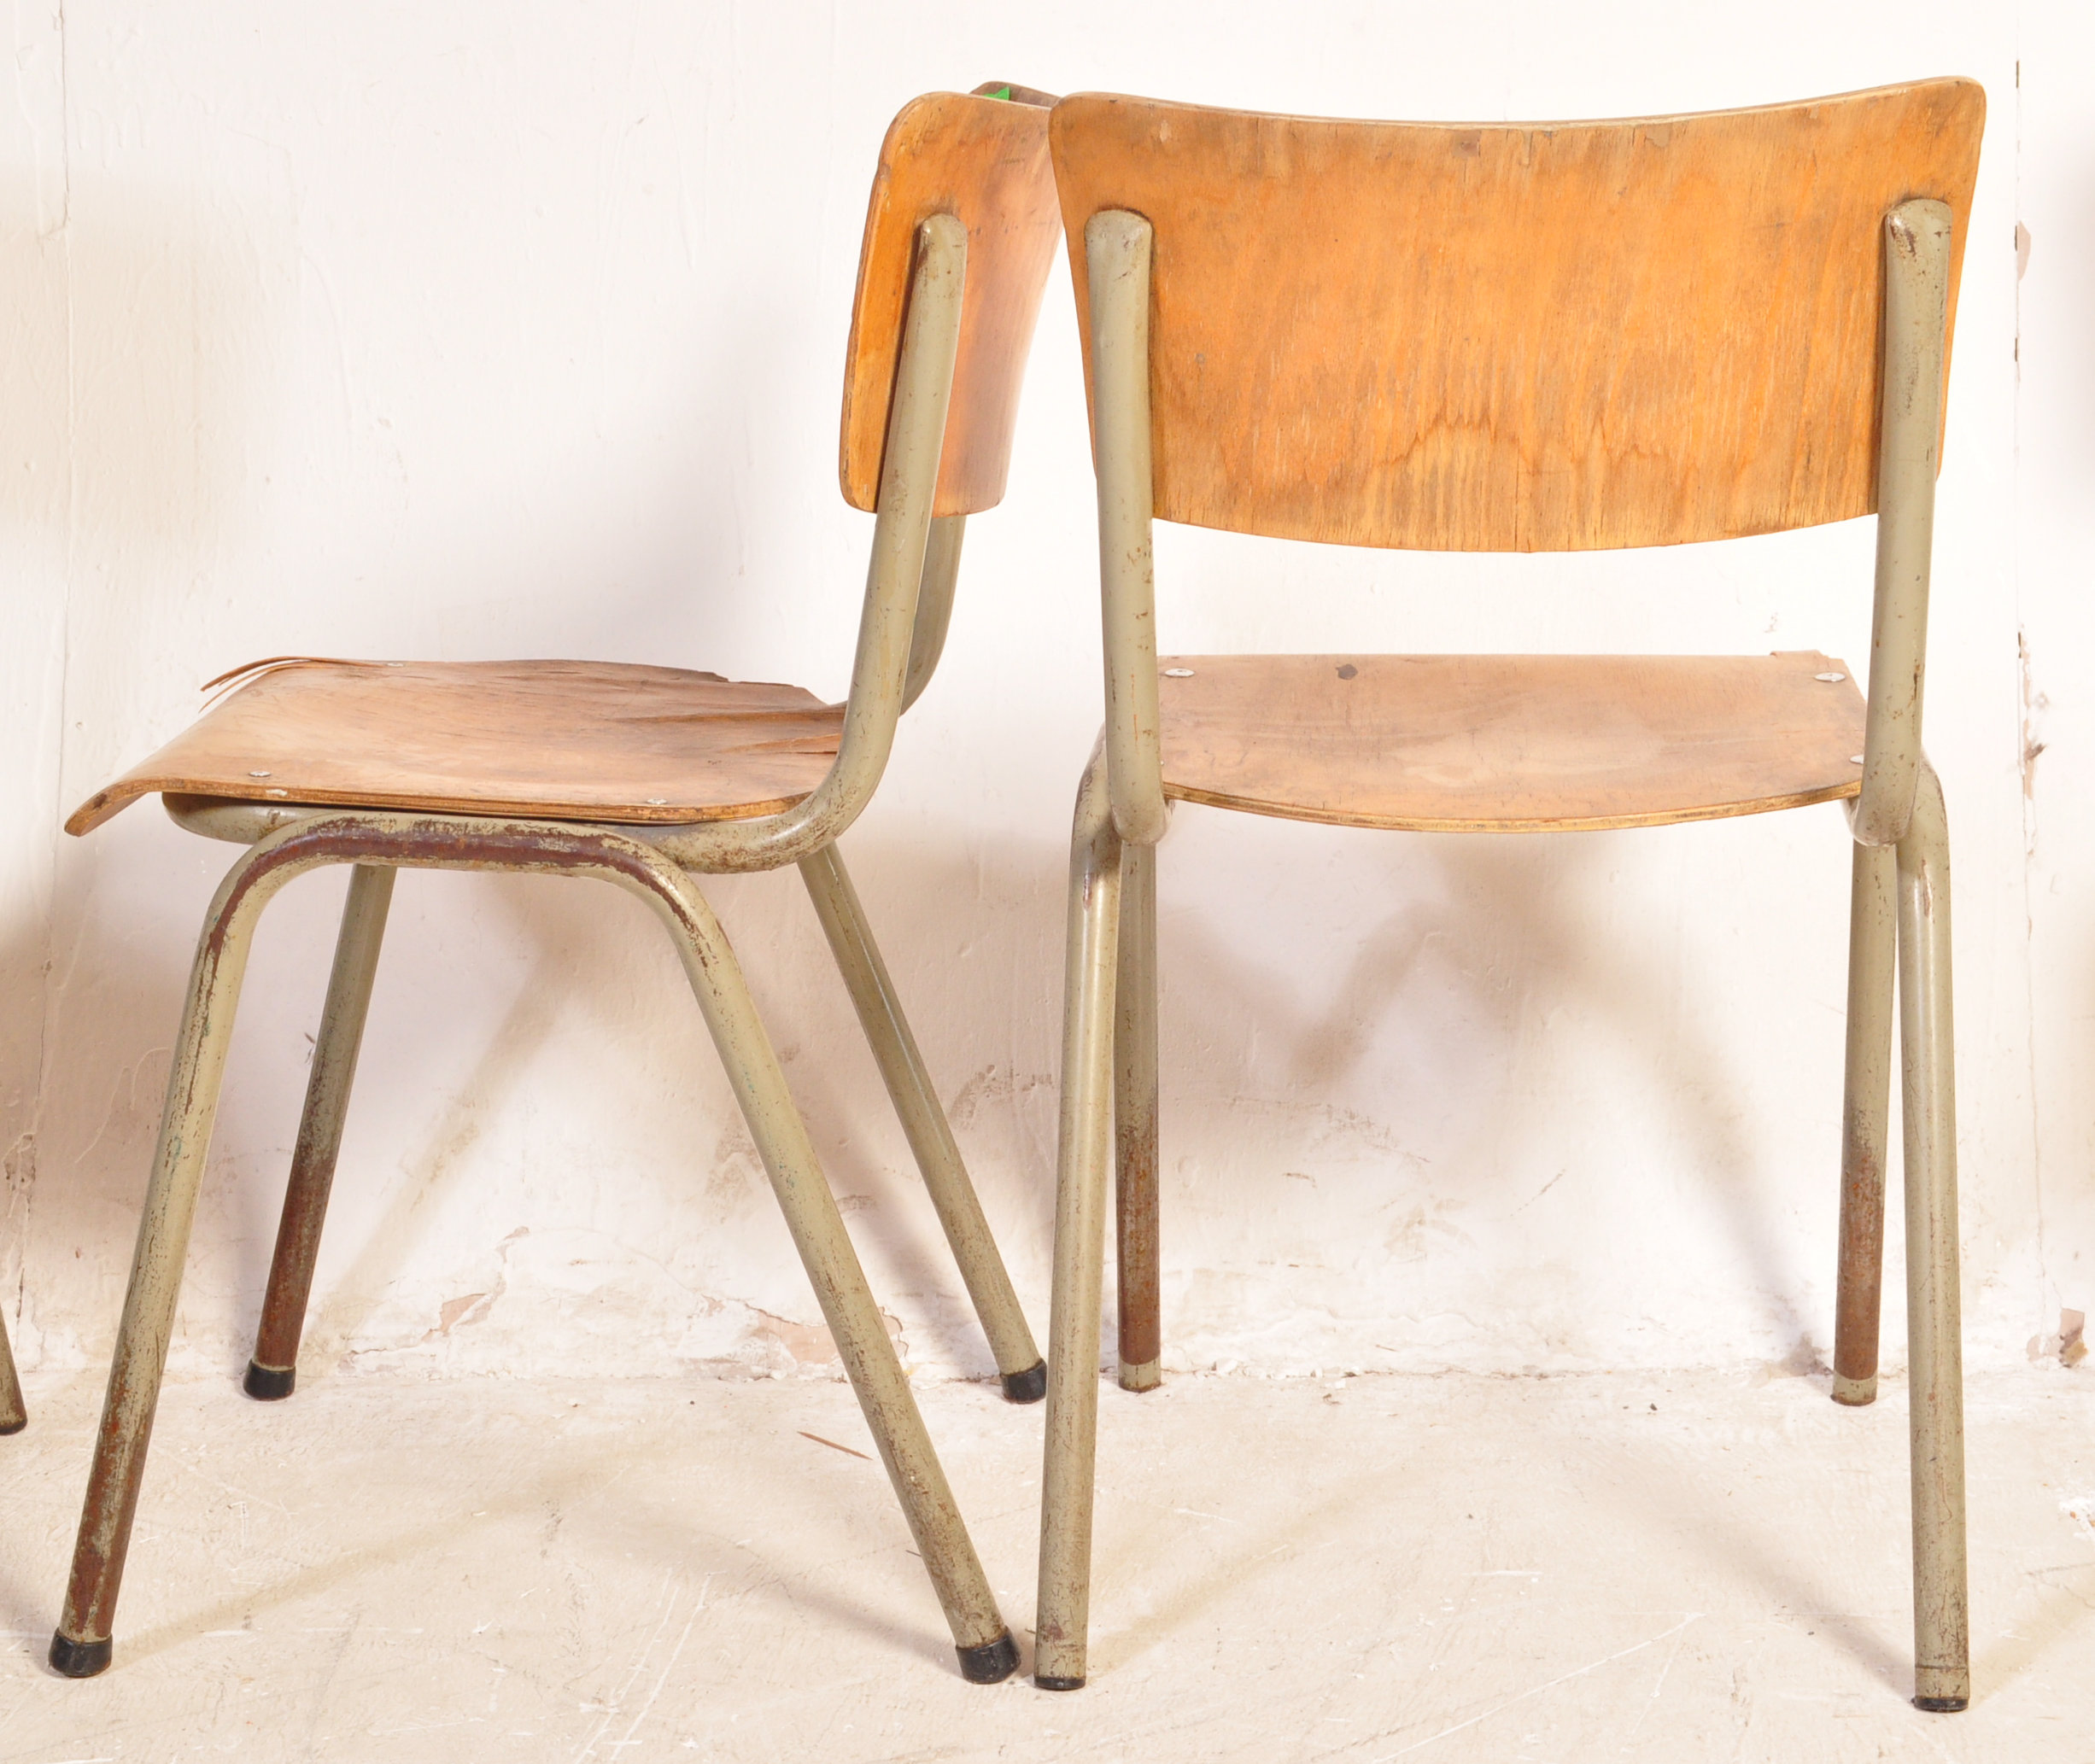 FIVE MID CENTURY INDUSTRIAL CAFE DINING CHAIRS - Image 4 of 4